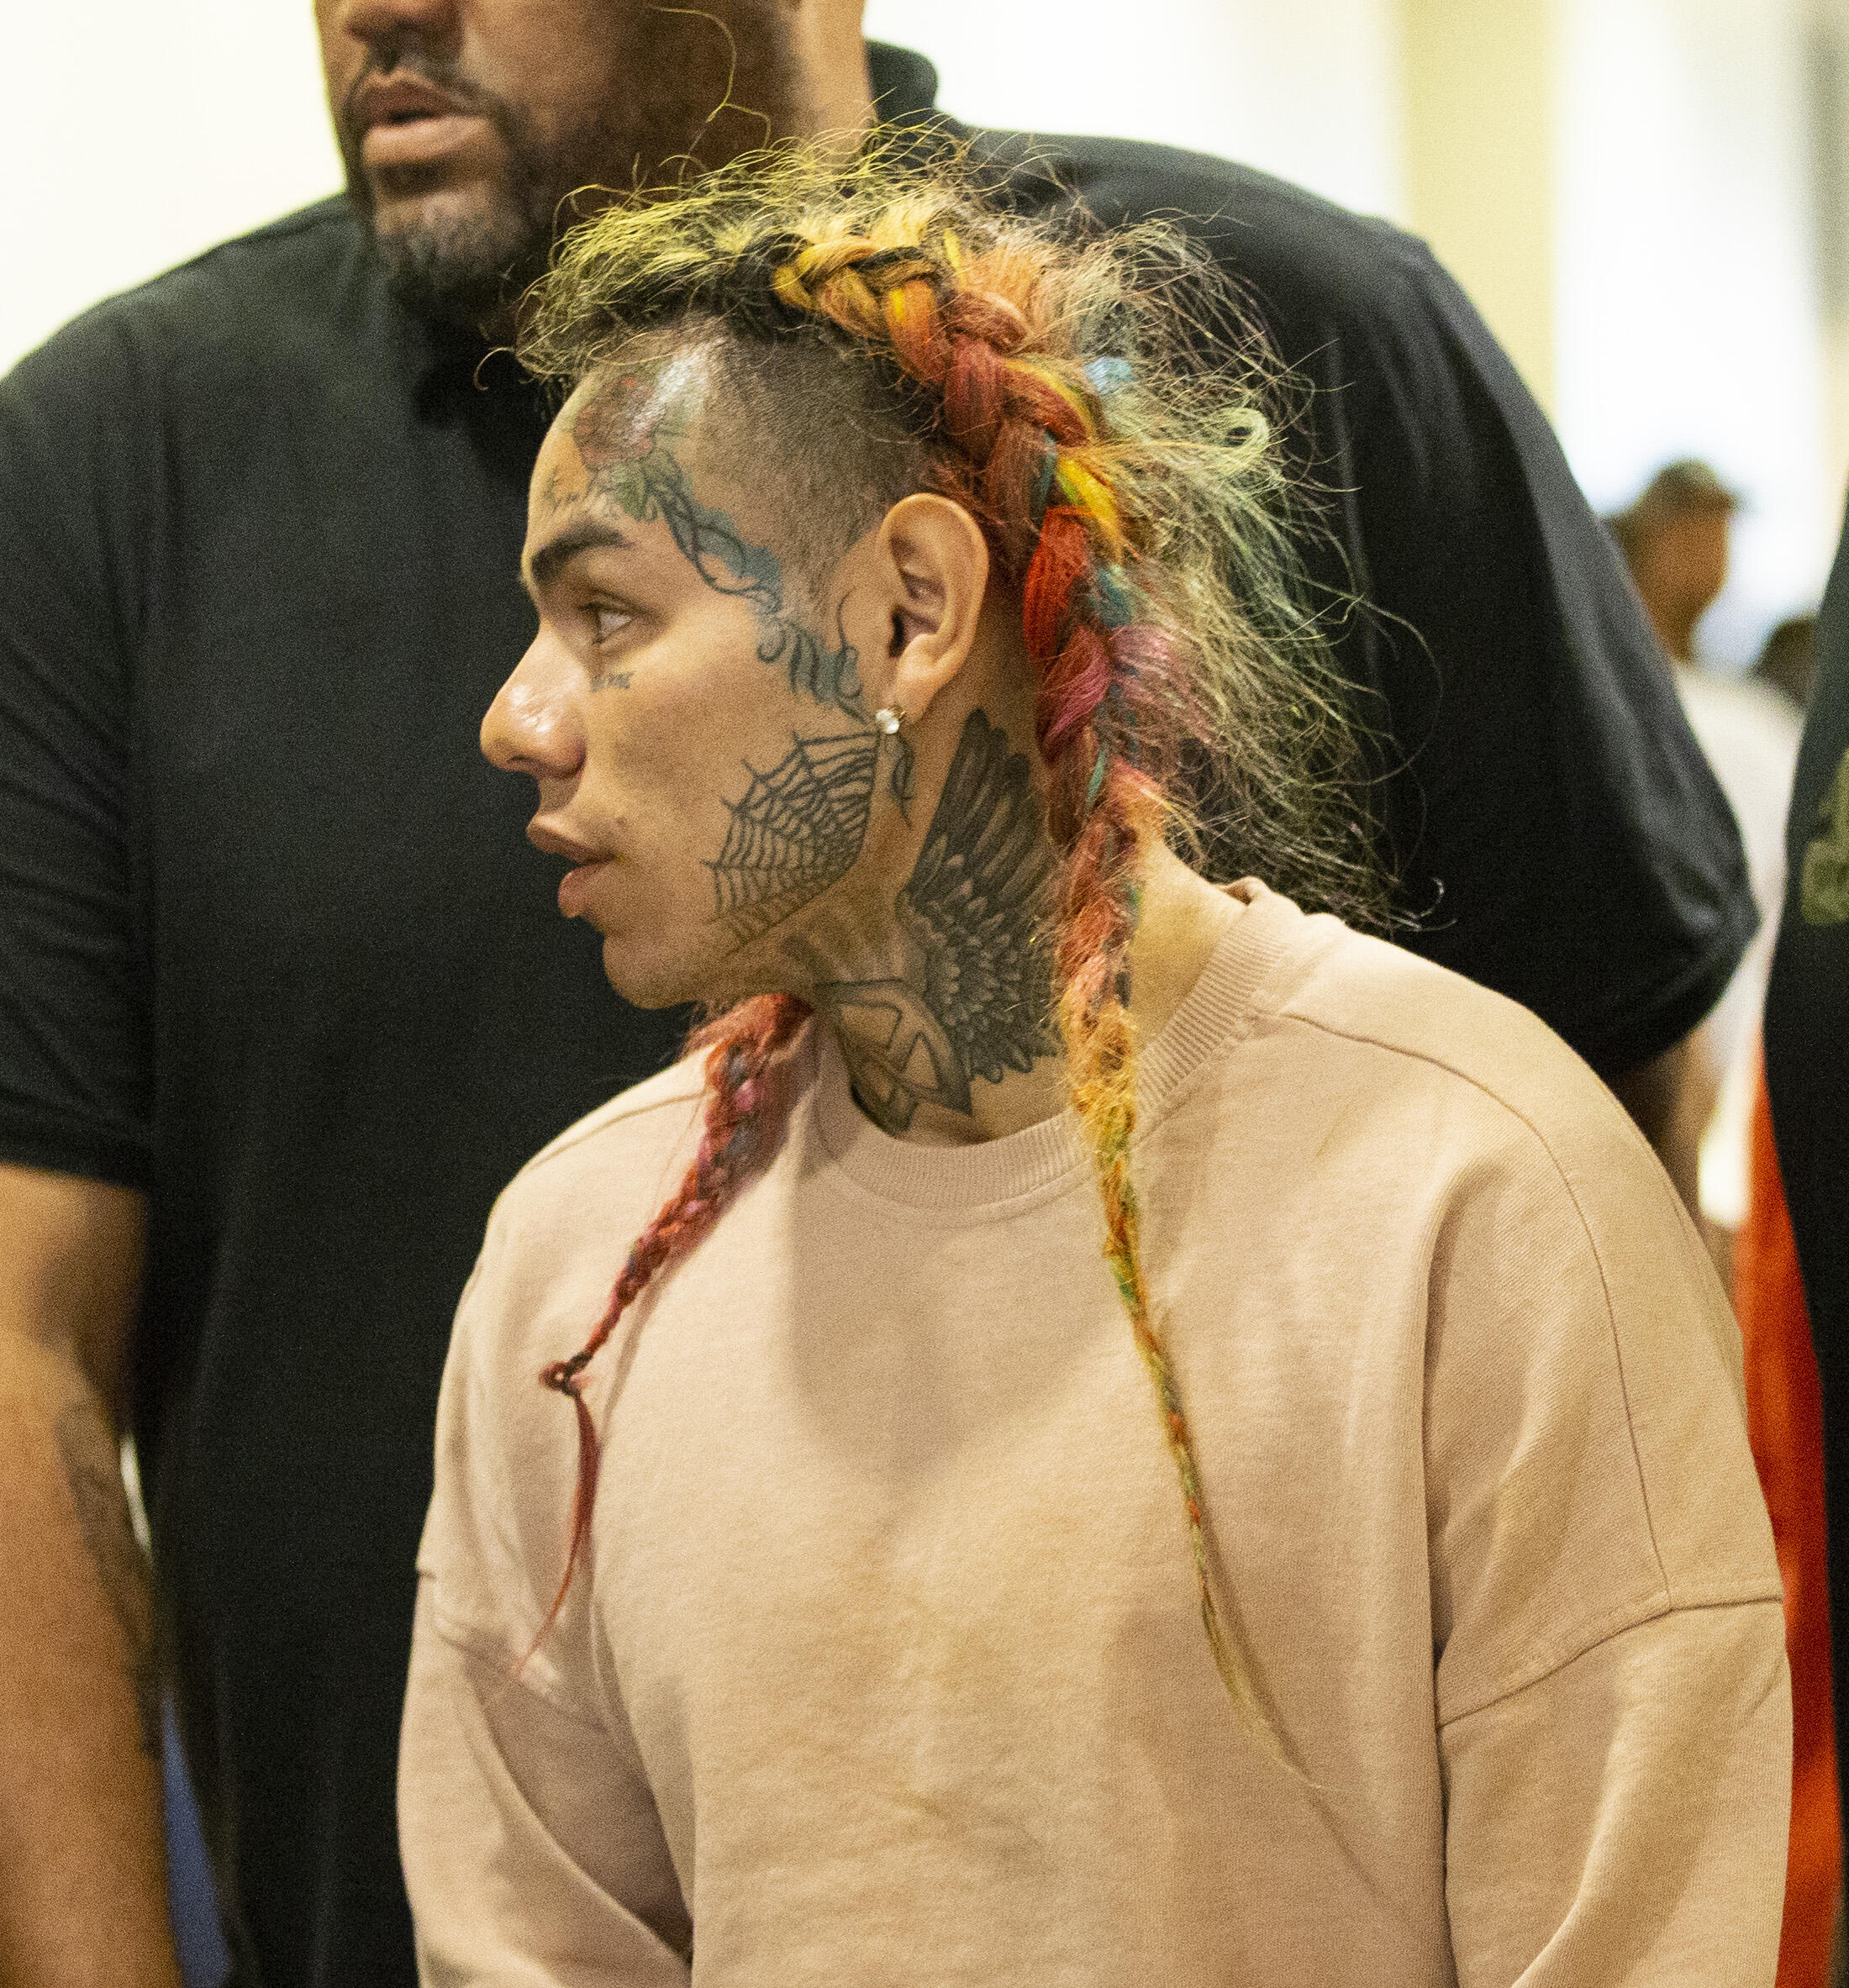 Tekashi 6ix9ine Thinks Rappers Hating On Him for Snitching Are "Jealous" - Thumbnail Image